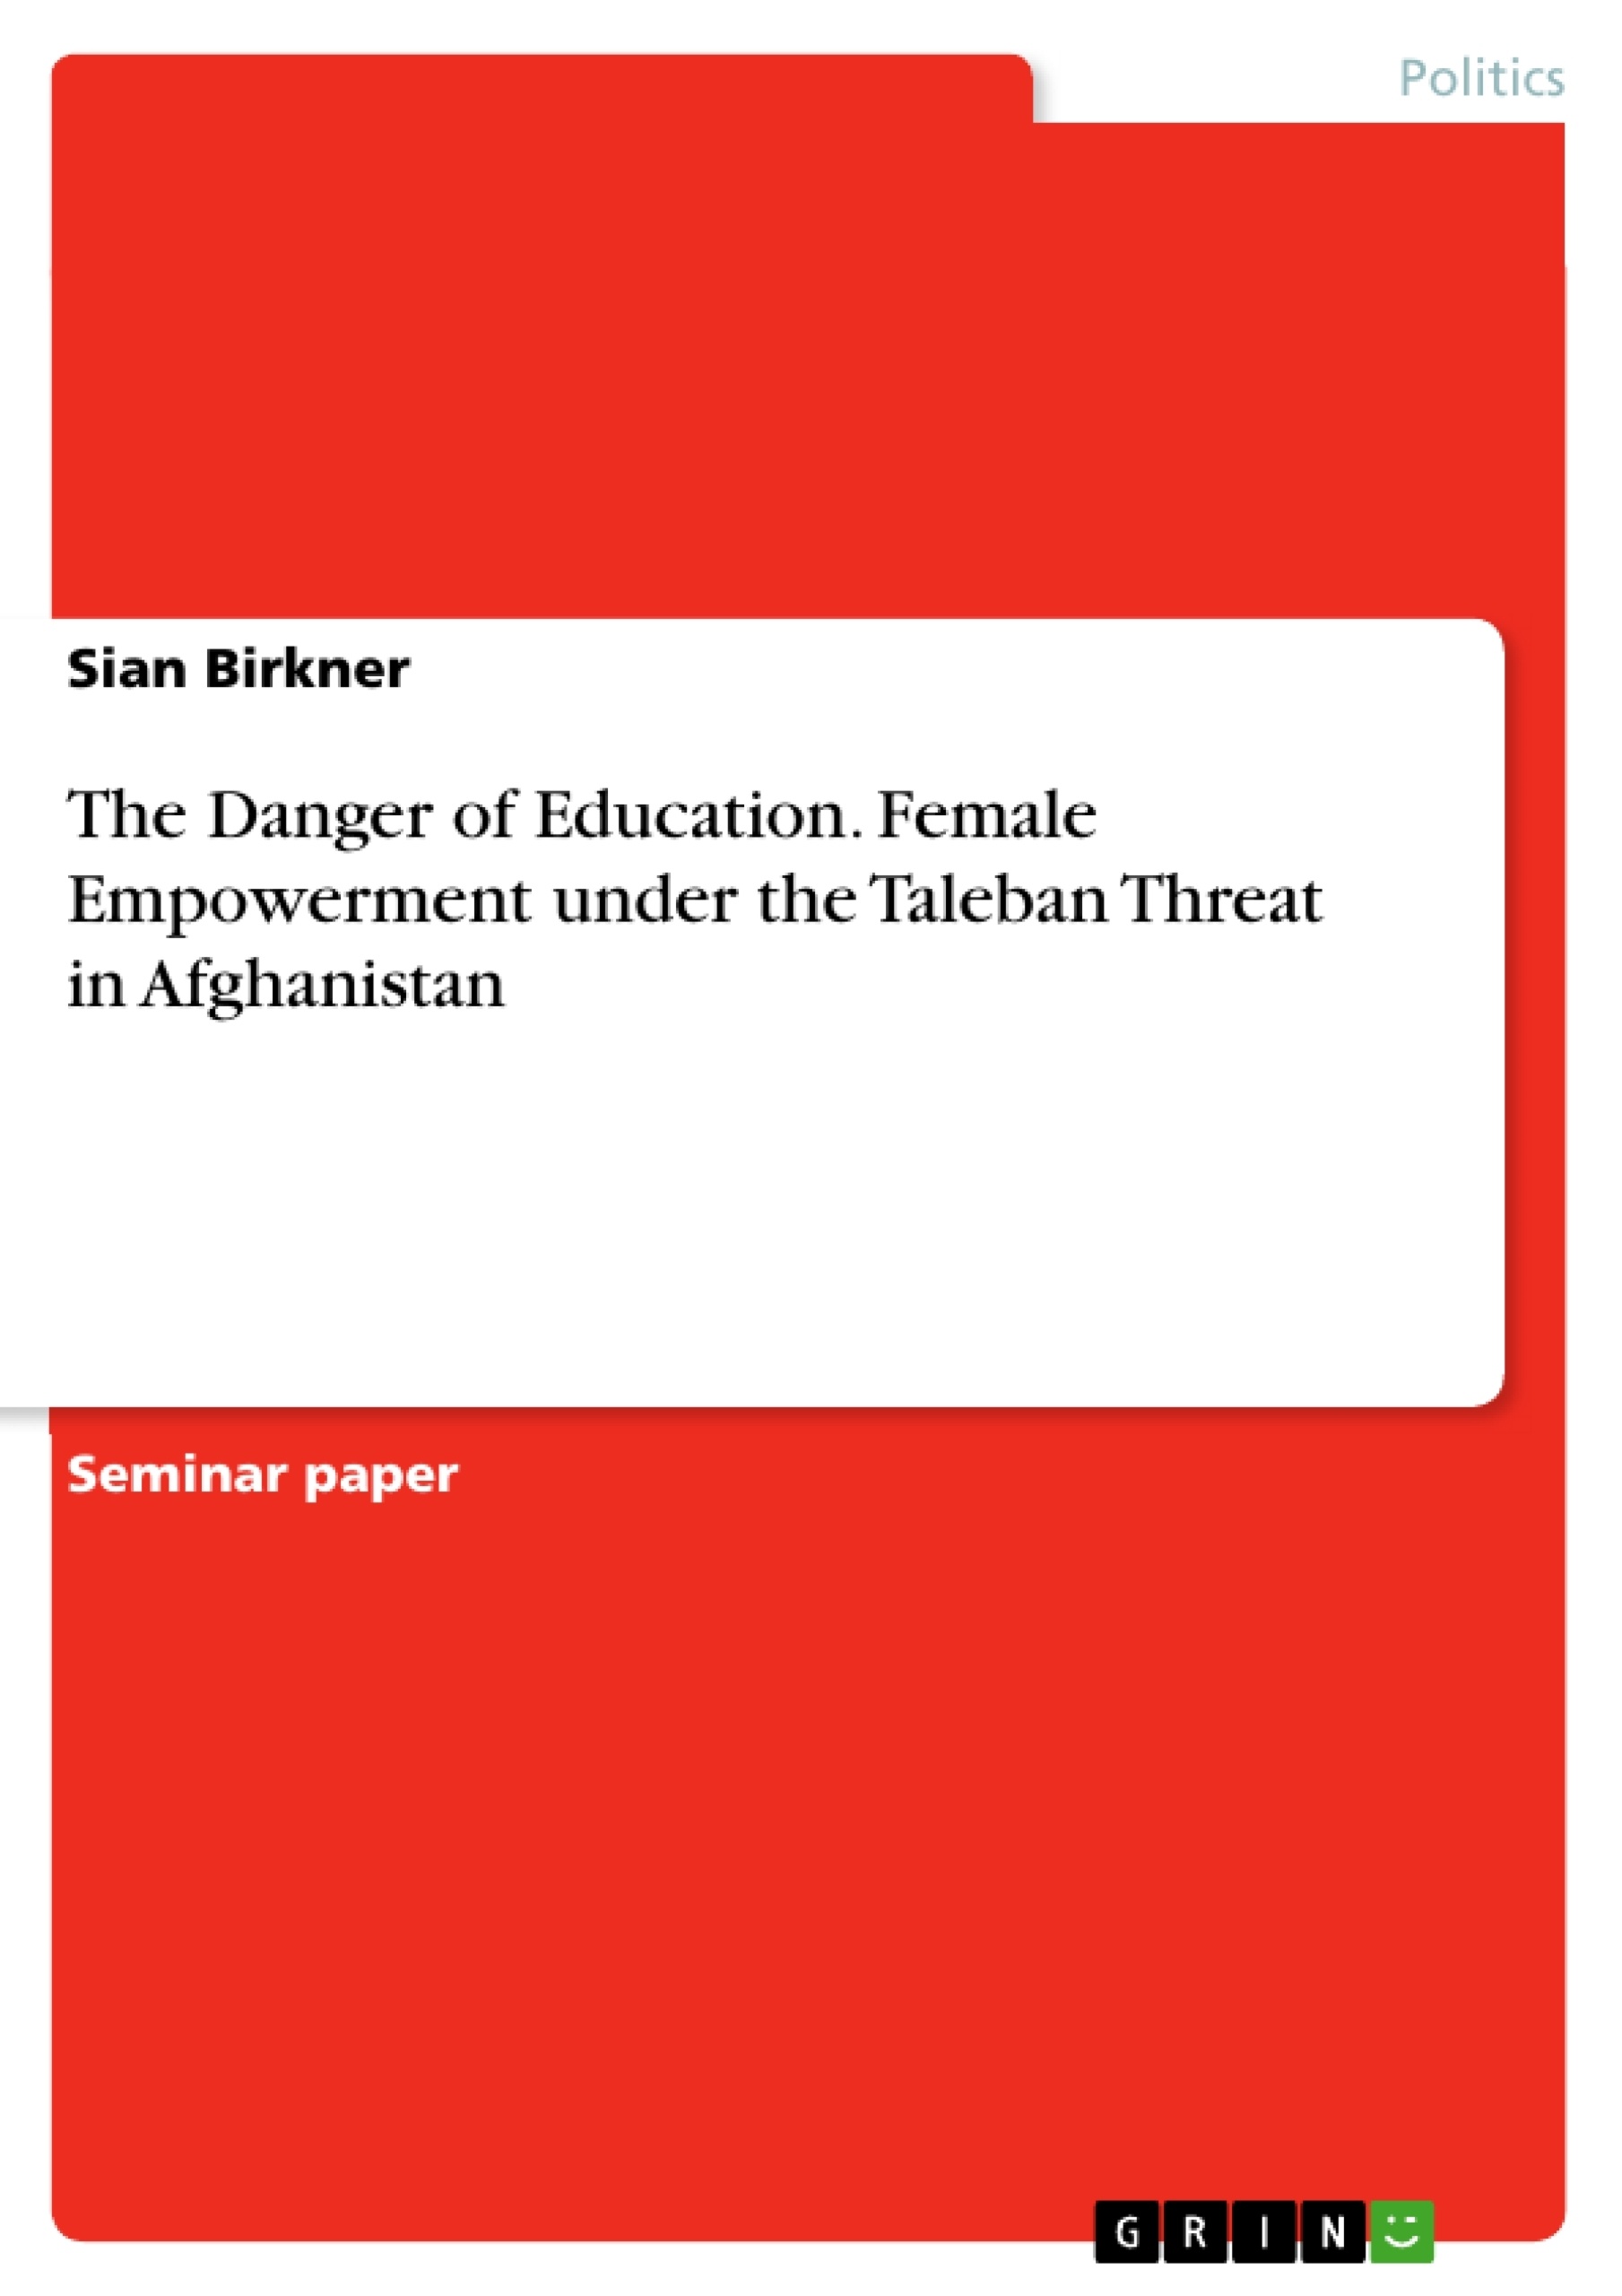 Titel: The Danger of Education. Female Empowerment under the Taleban Threat in Afghanistan